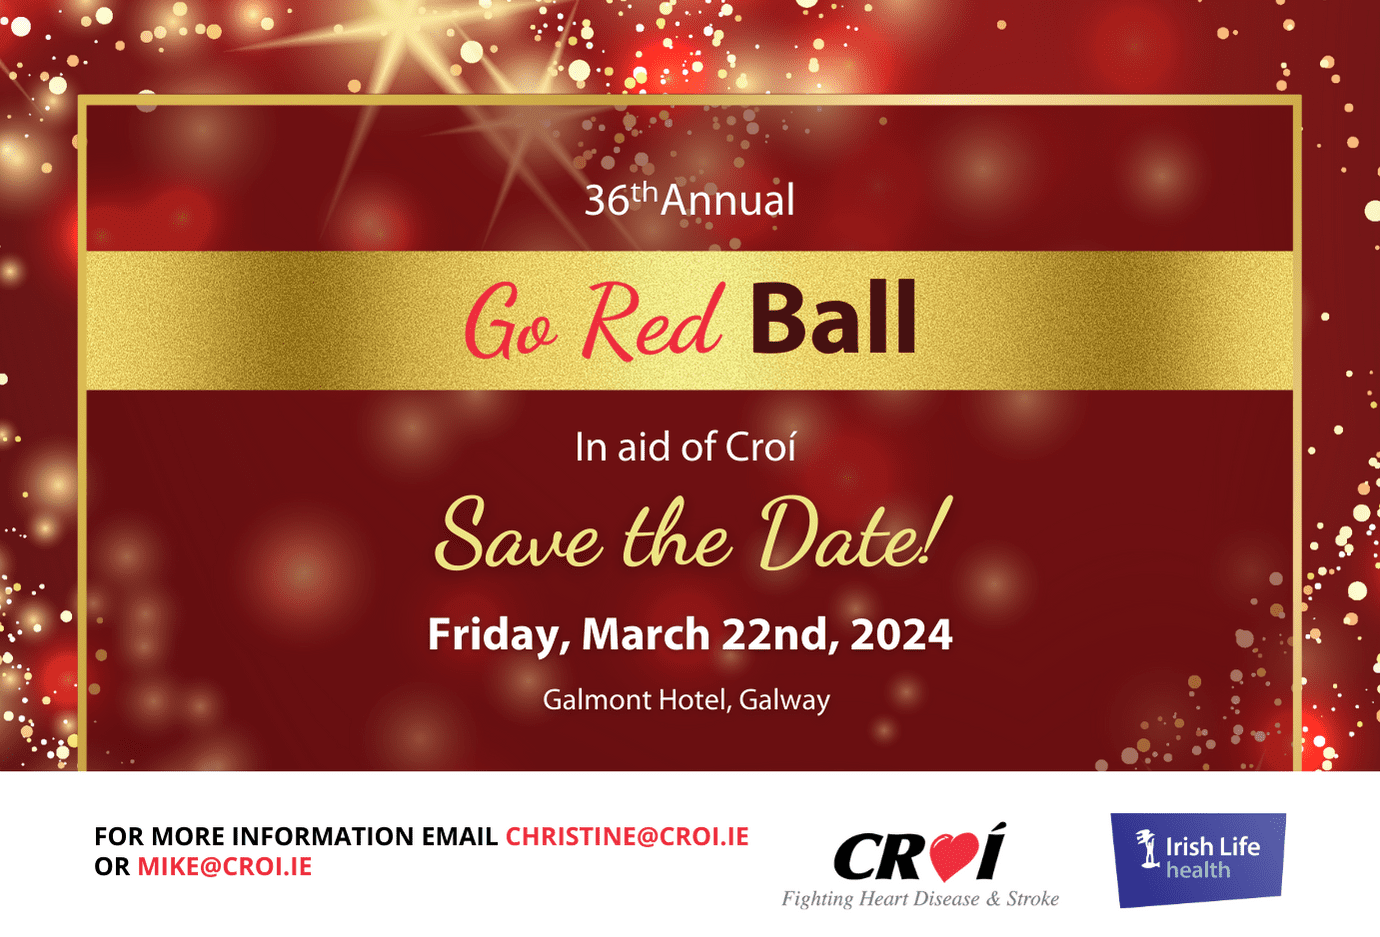 Croí Go Red Ball 2024 Save the Date! • Croi Heart & Stroke Charity